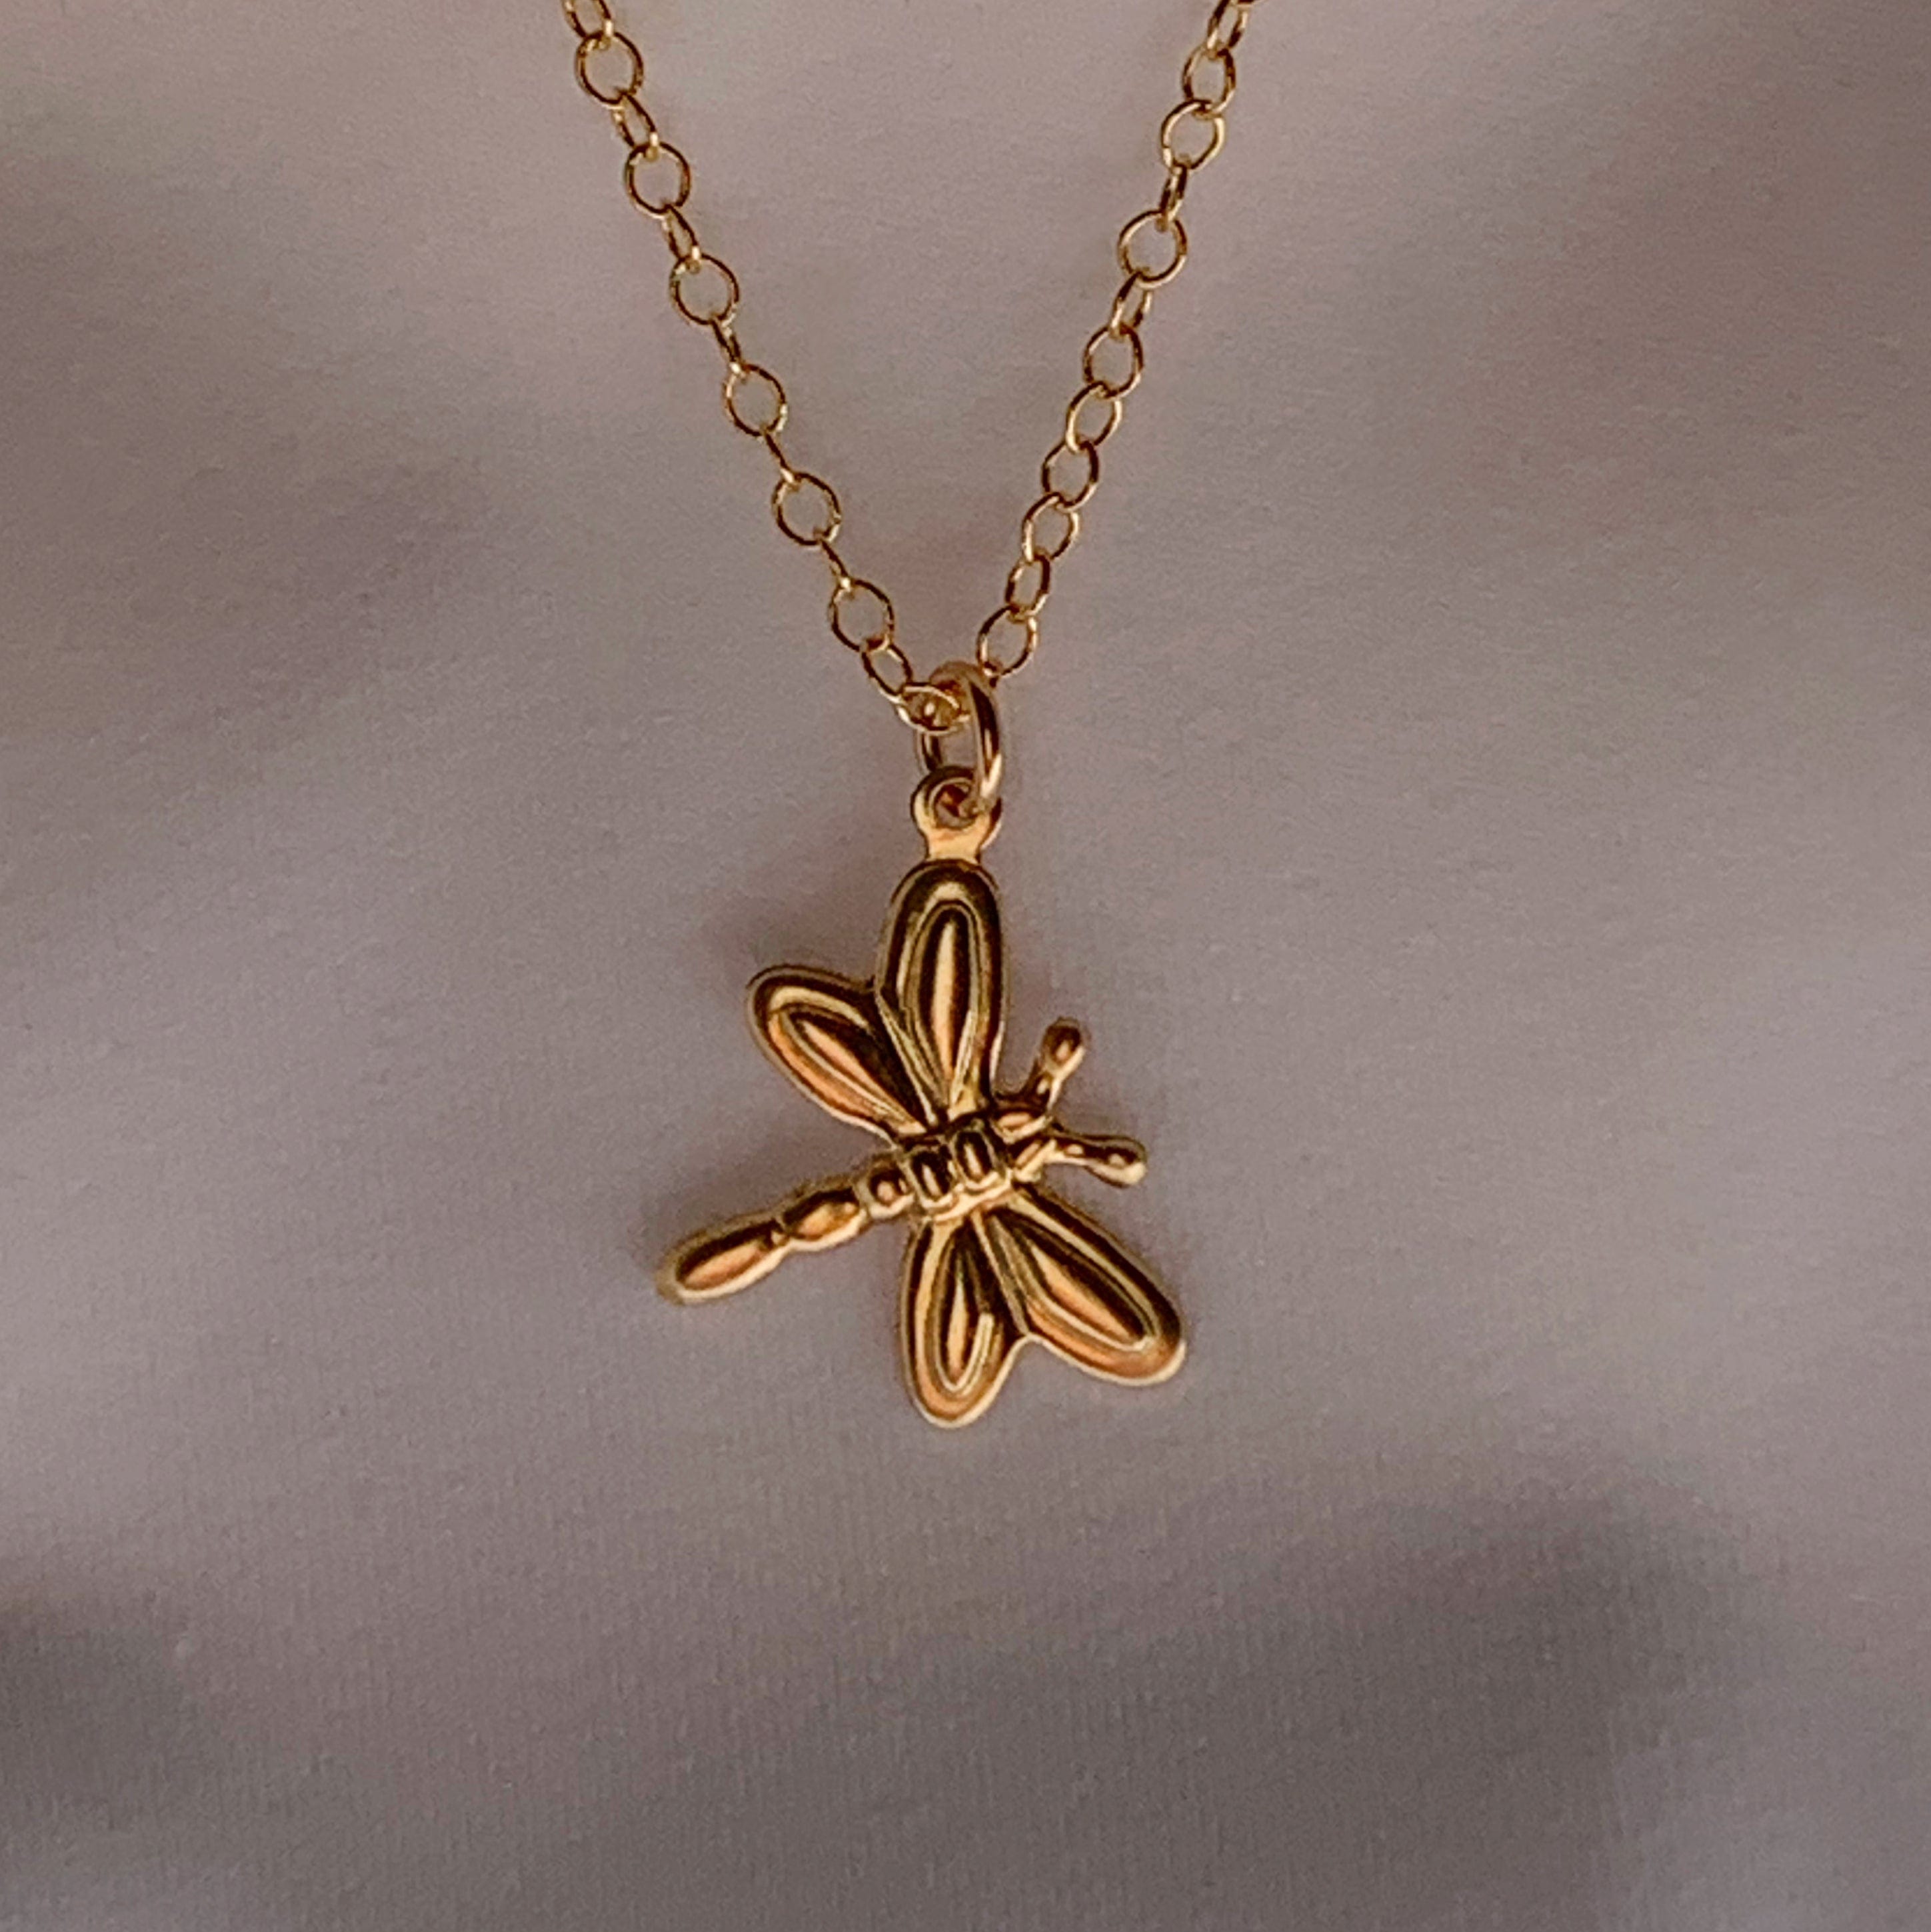 Dragonfly Charm Necklace - Jewelers Garden